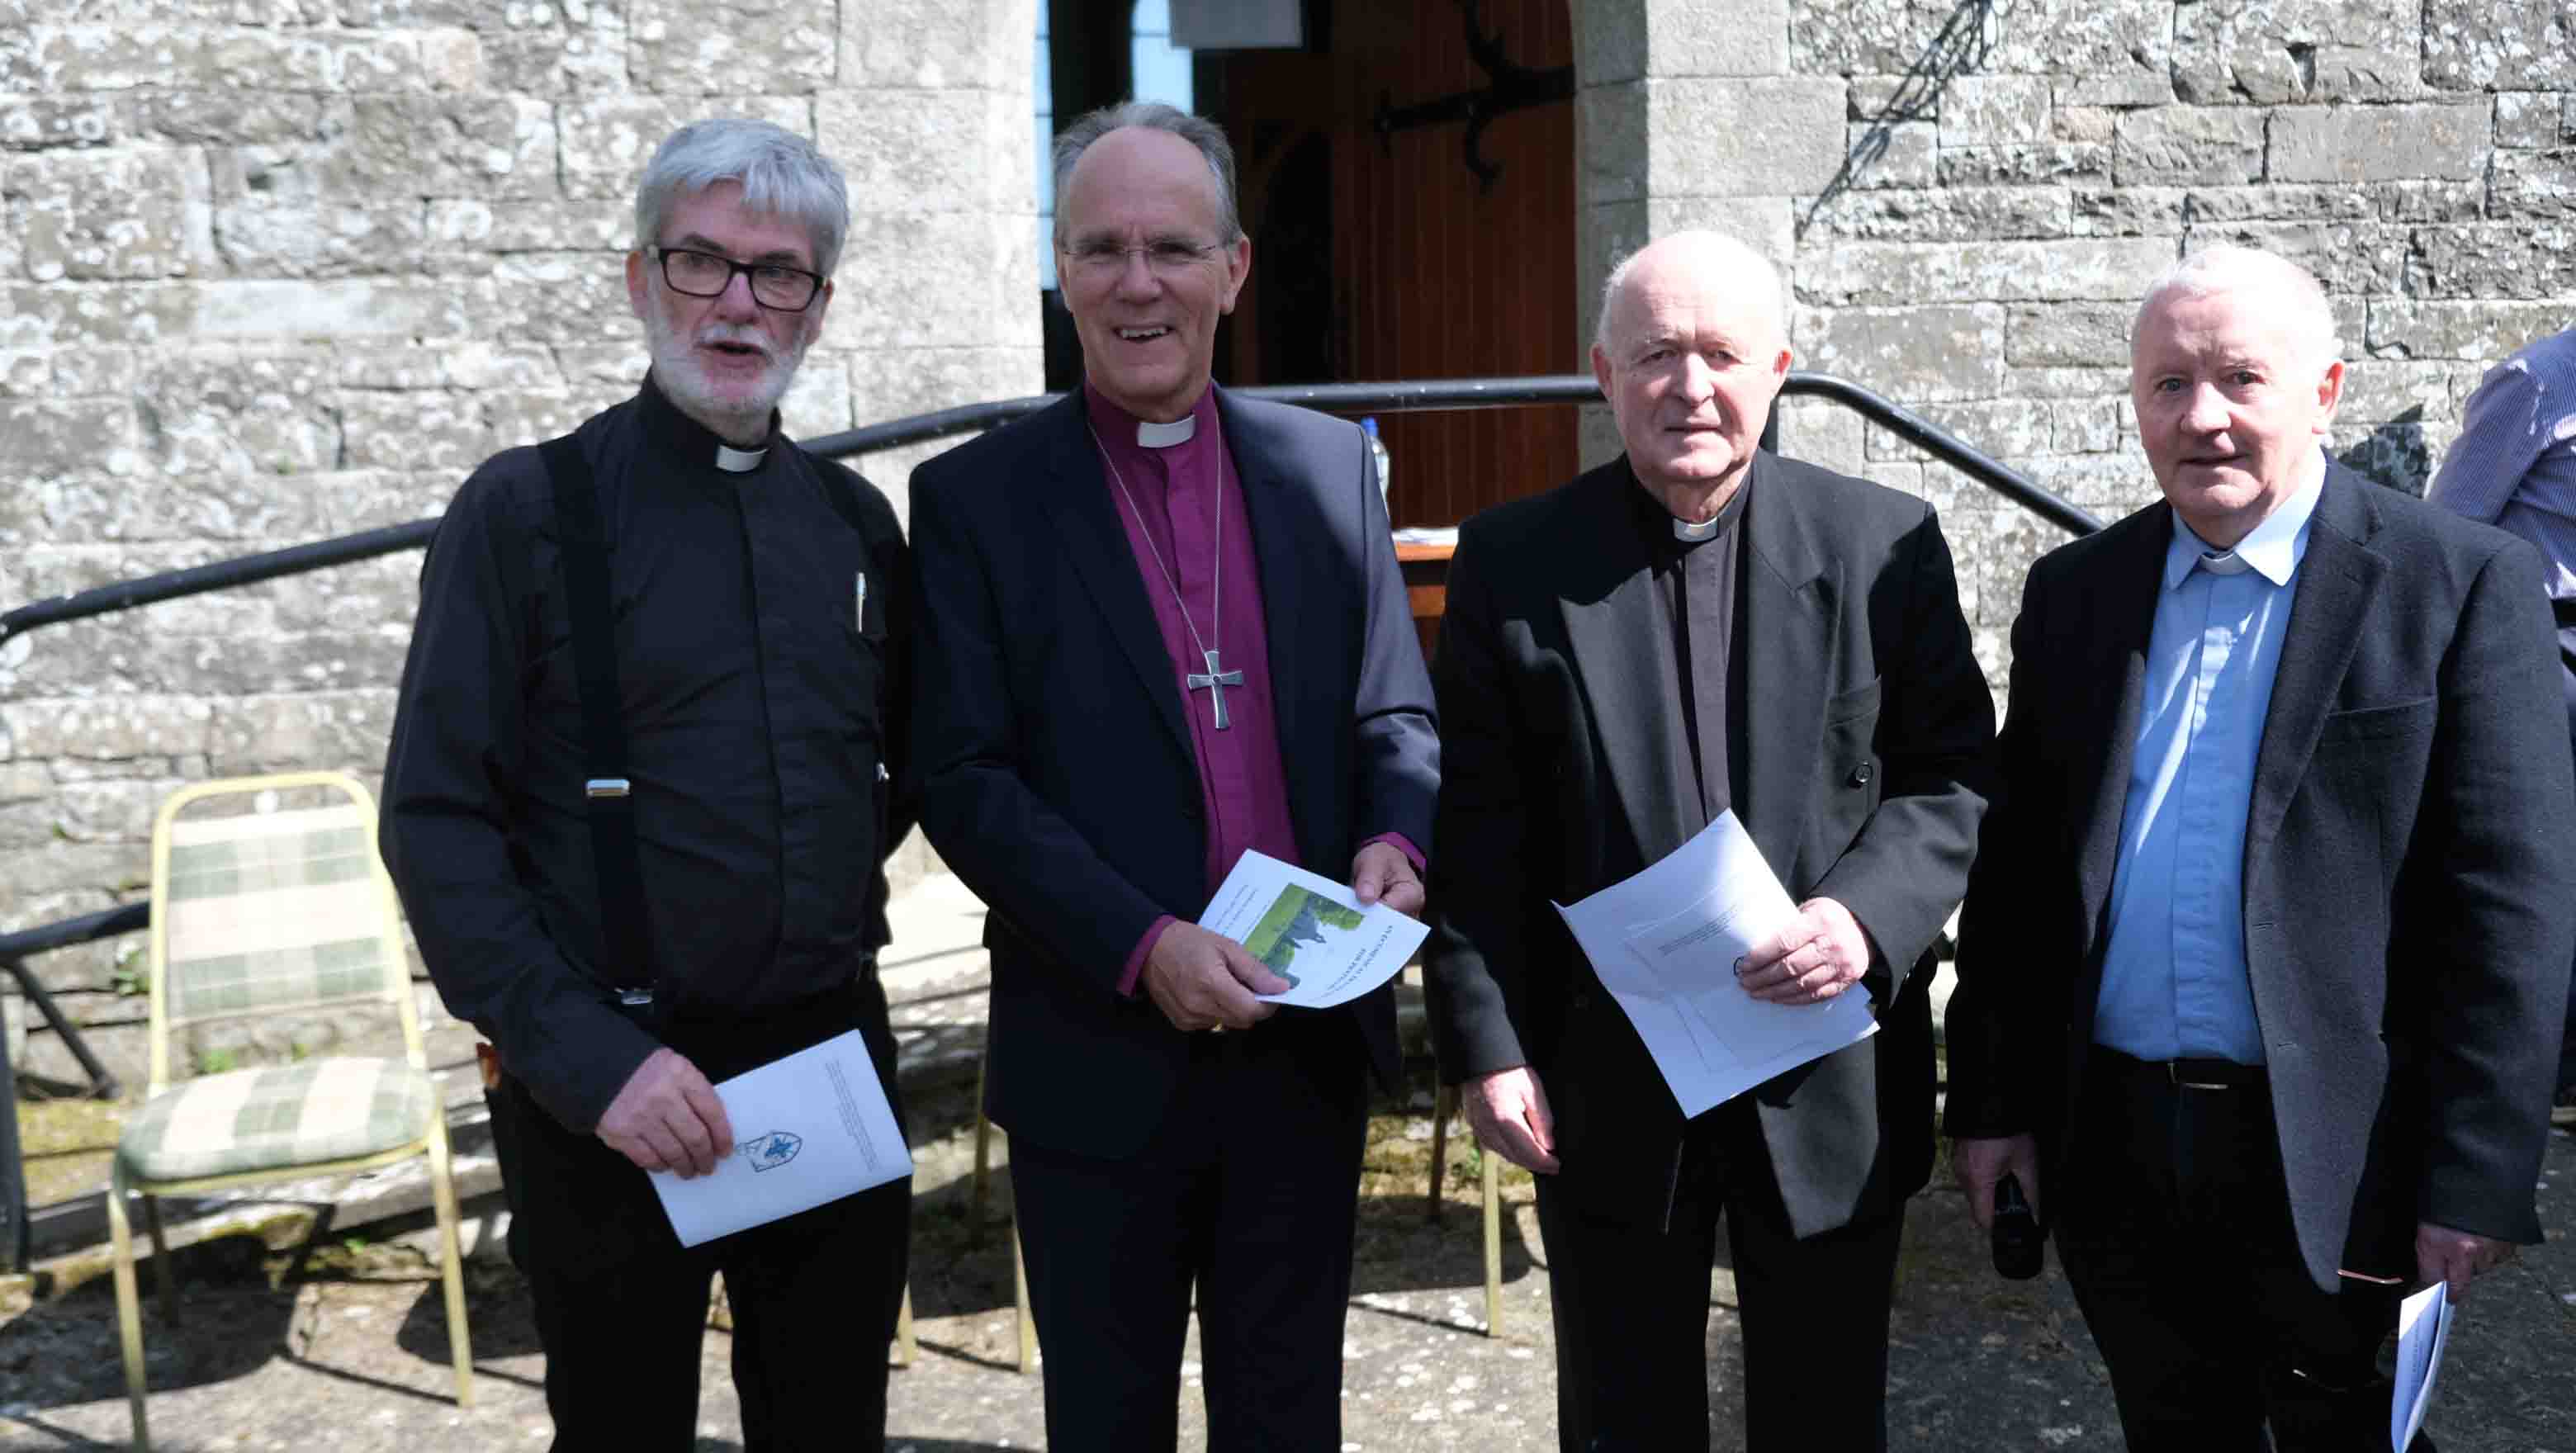 Taking part in the ecumenical service at Pentecost were (from left): the Revd Ian Cruickshank, Rector of the Carrickmacross Group of Parishes; Bishop Ian Ellis; Bishop Larry Duffy and Canon Martin Treanor, P.P., Inniskeen Parish.